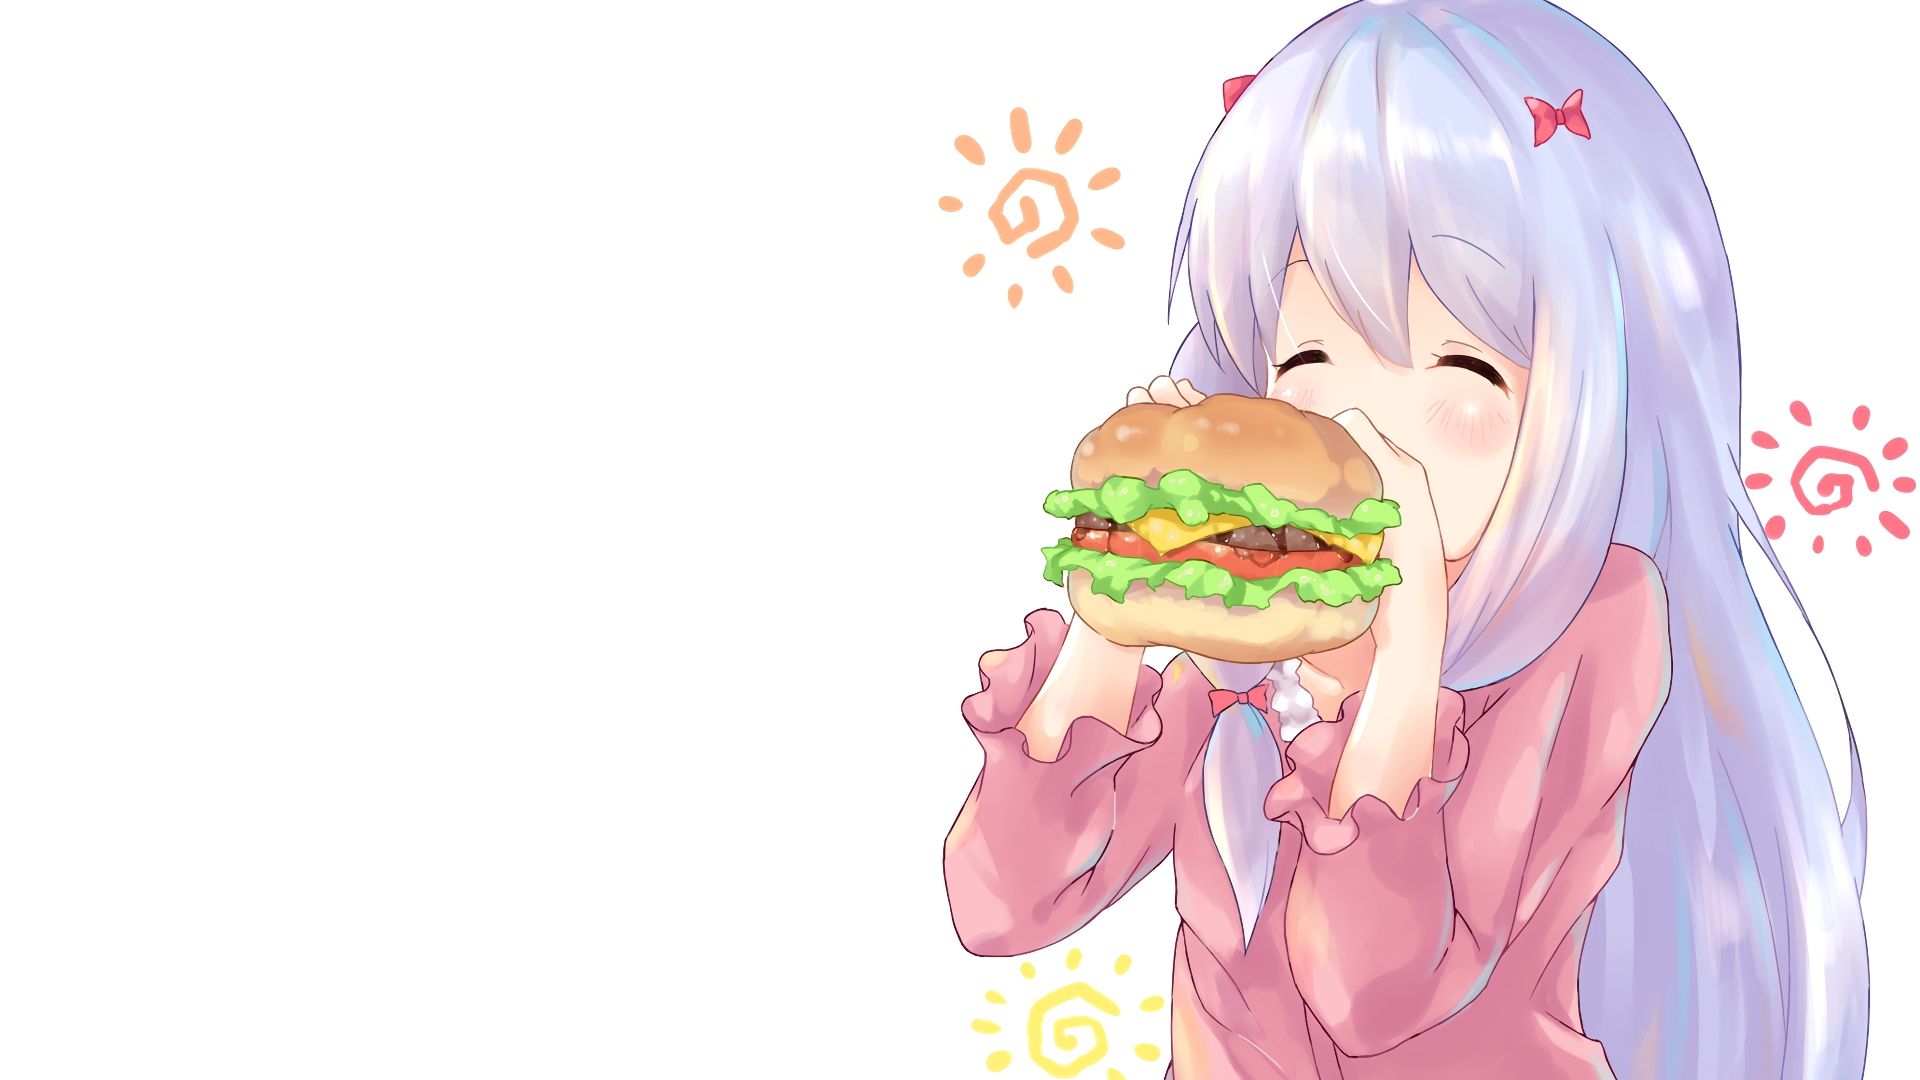 Anime Girl Eating a Burger Poster for Sale by SgtAwesomeness  Redbubble